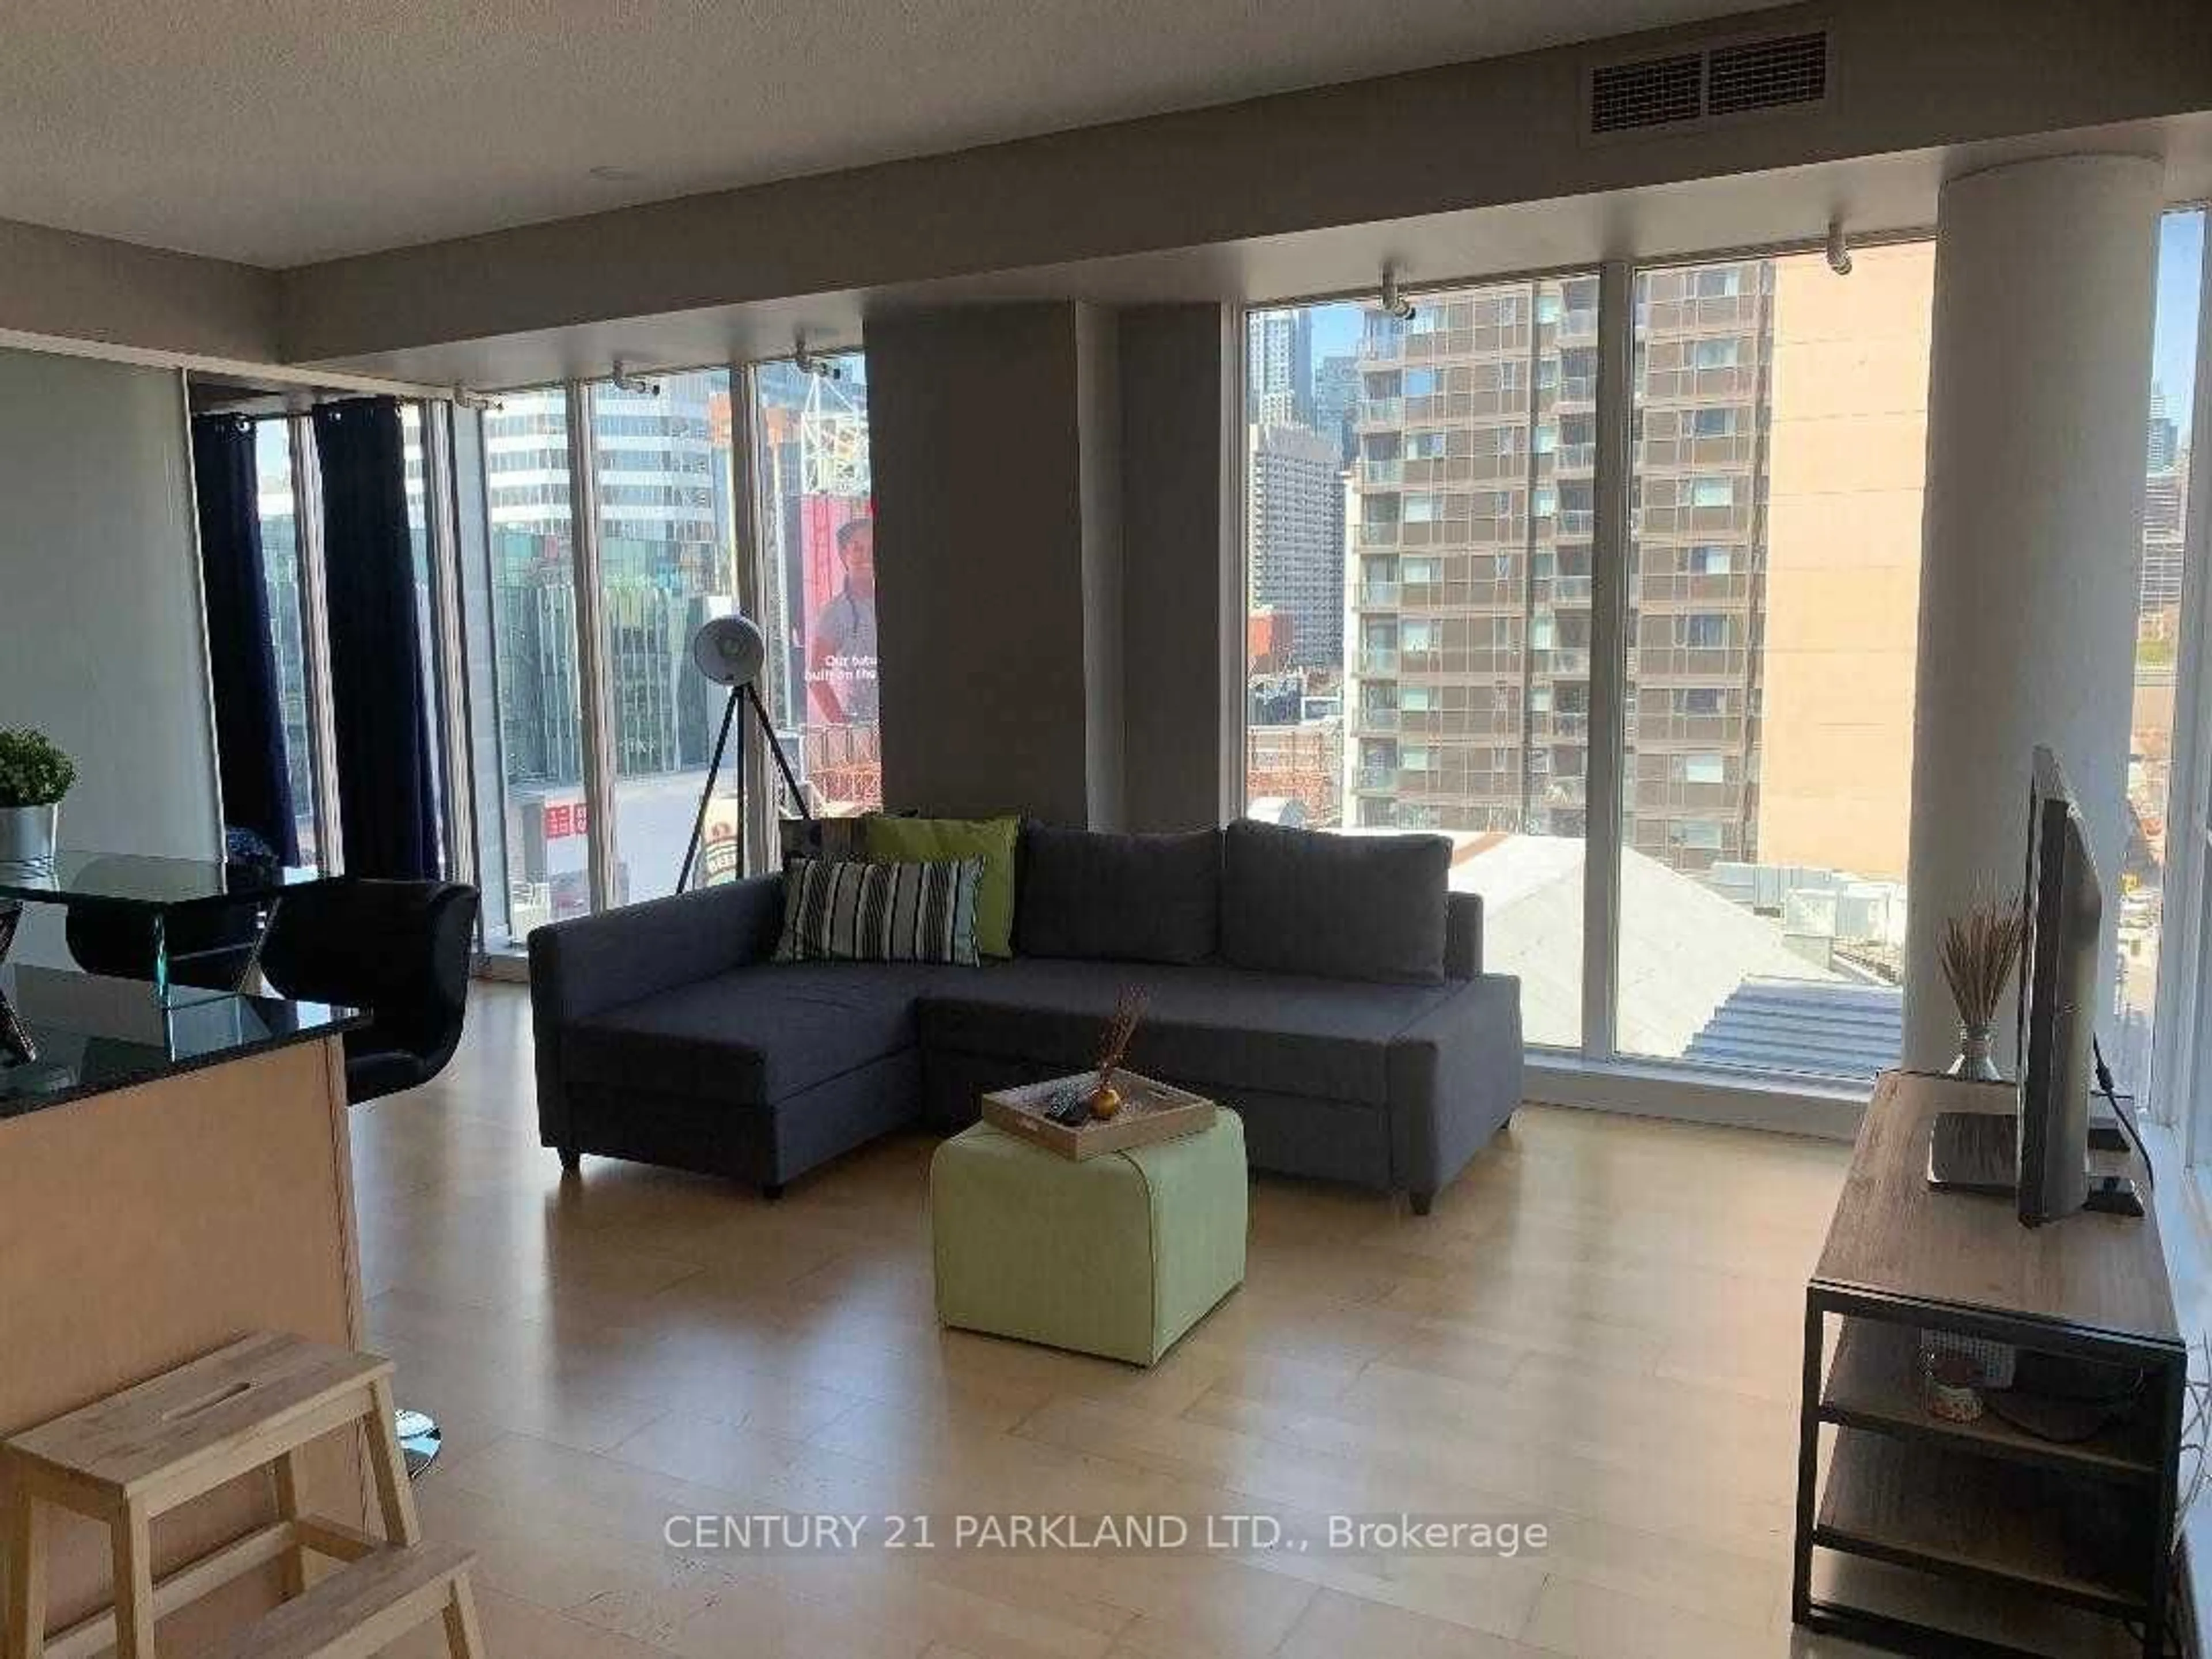 A pic of a room for 220 Victoria St ##1101, Toronto Ontario M5B 2R6